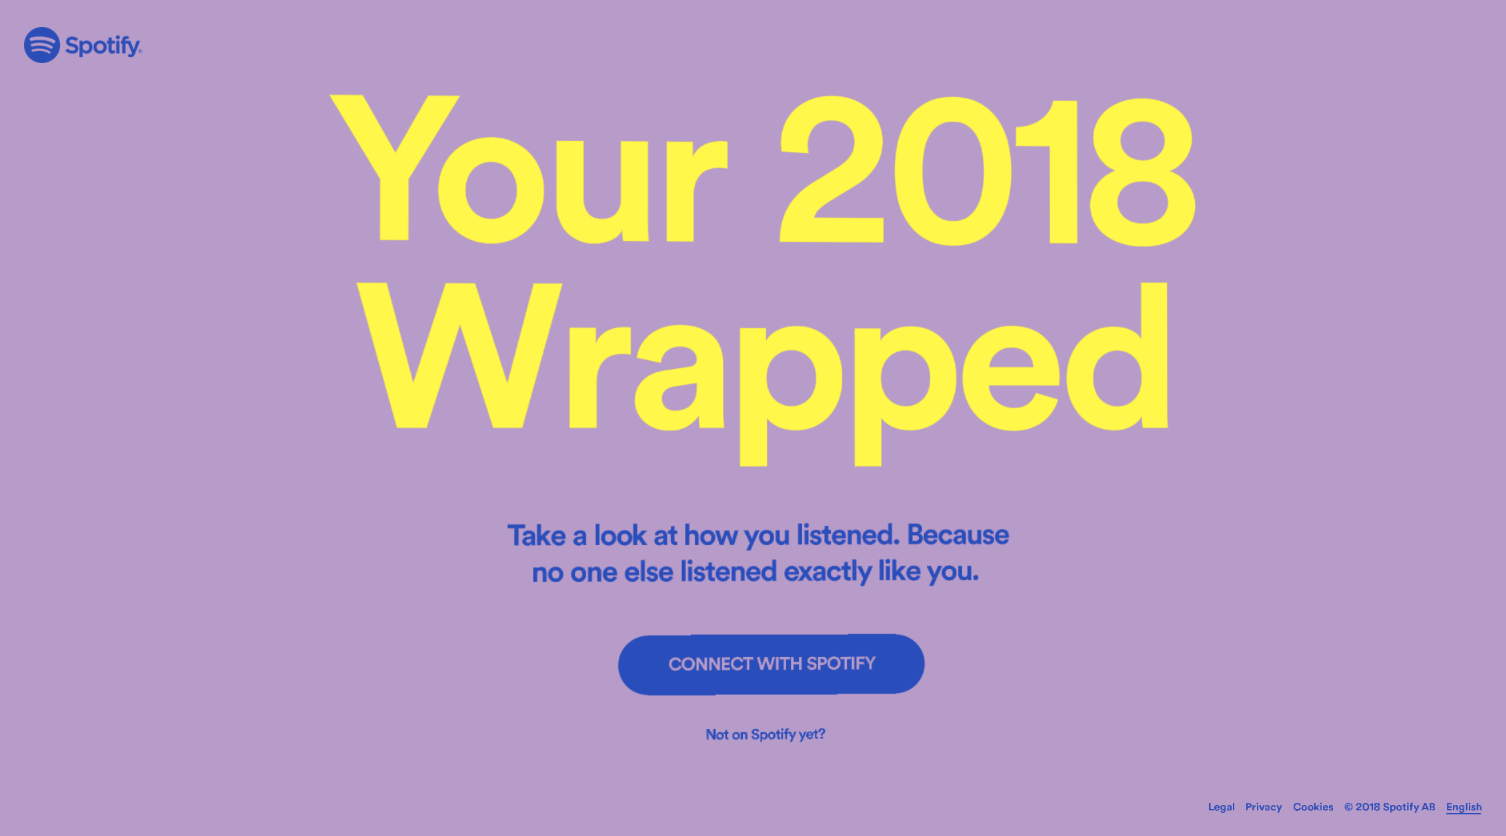 Spotify-year-wrapped-exemple-marketing-digital